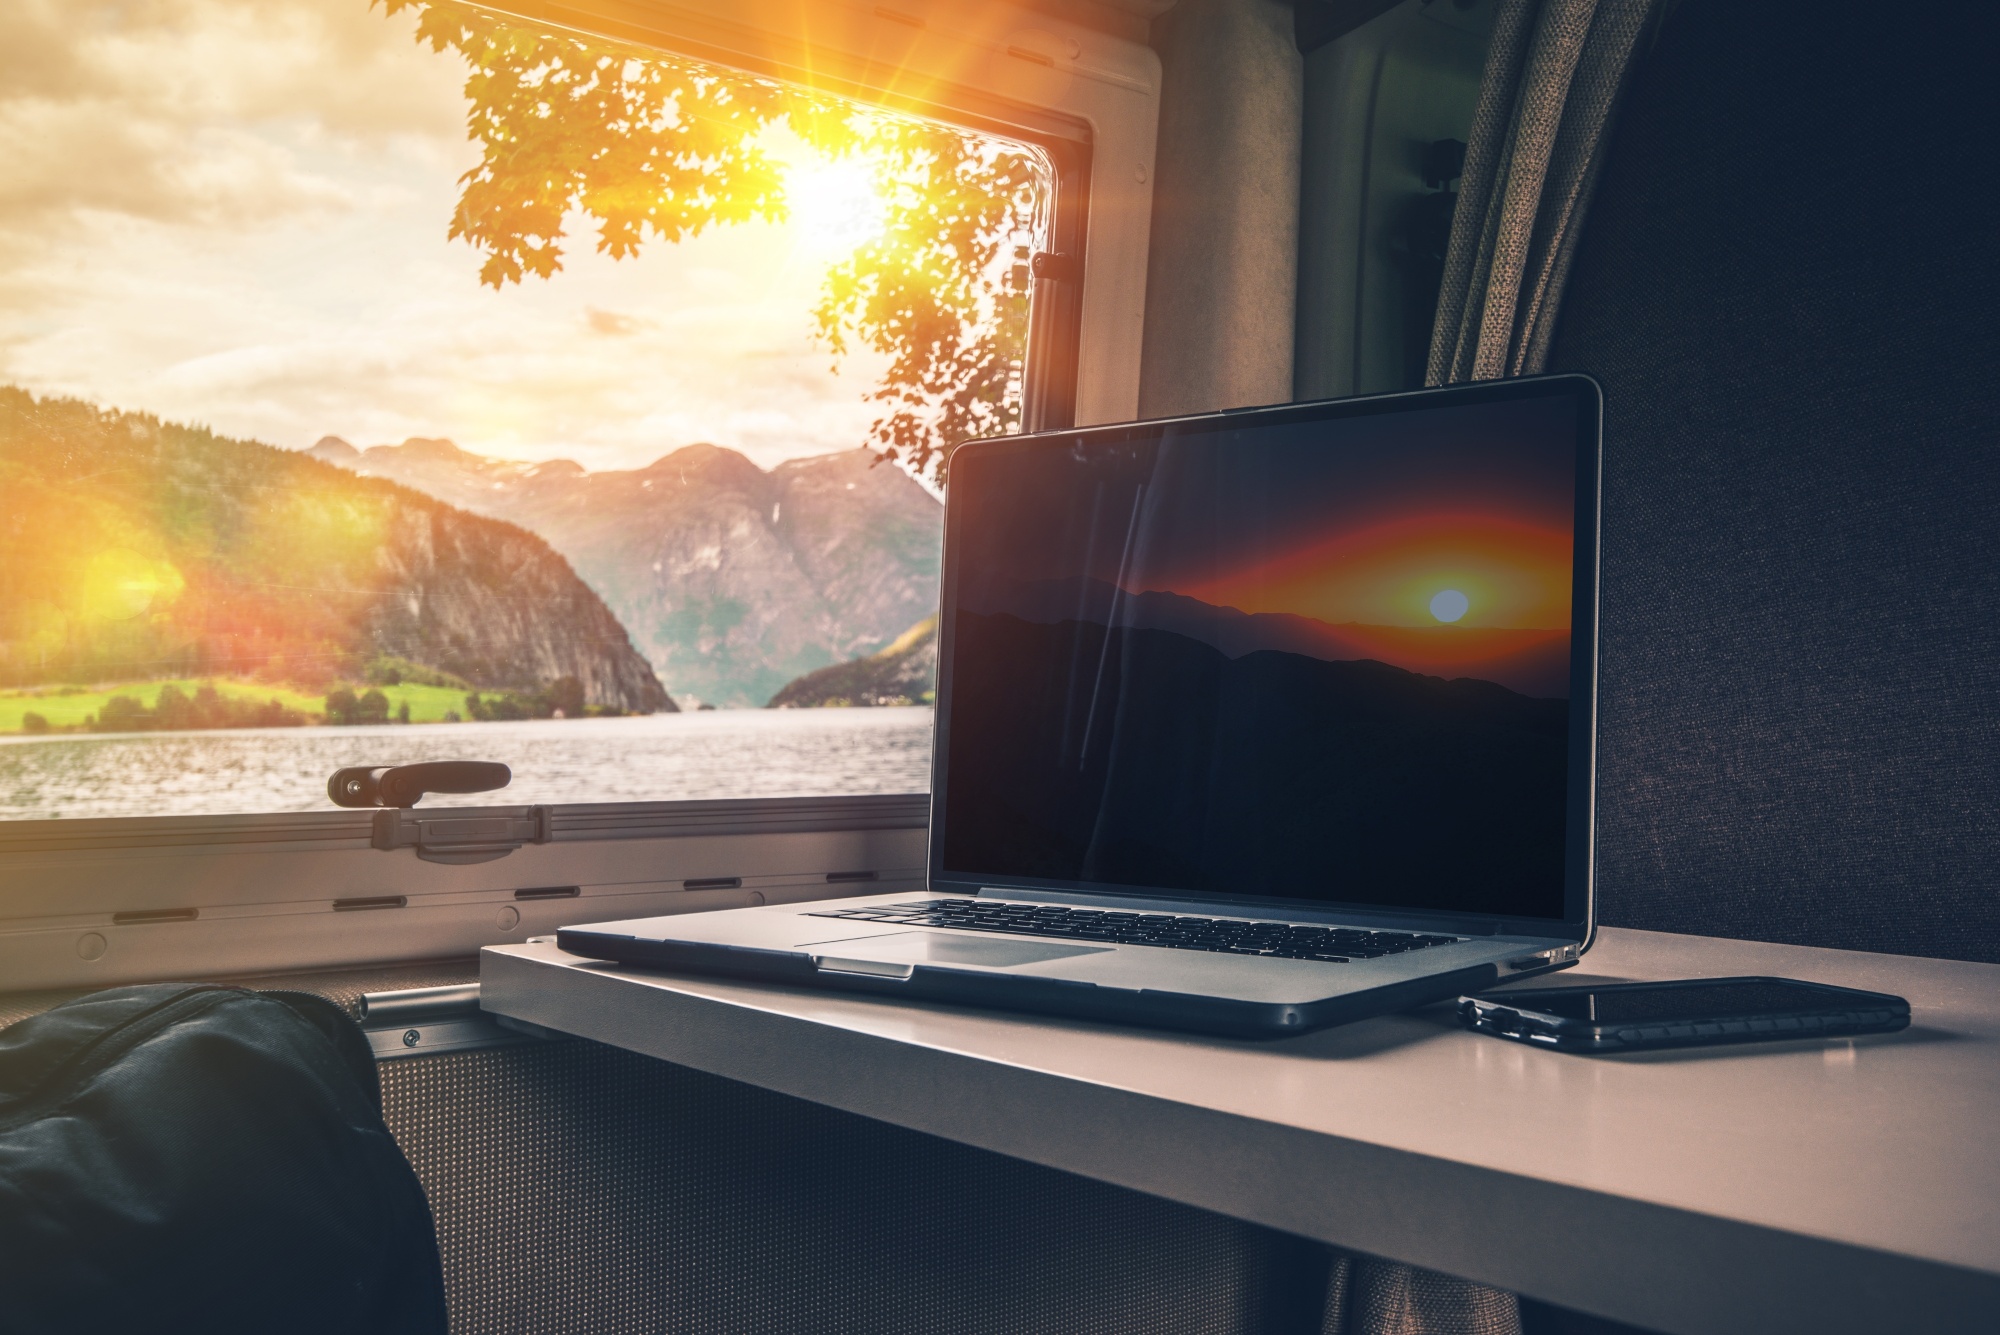 An open laptop on an RV table next to a window